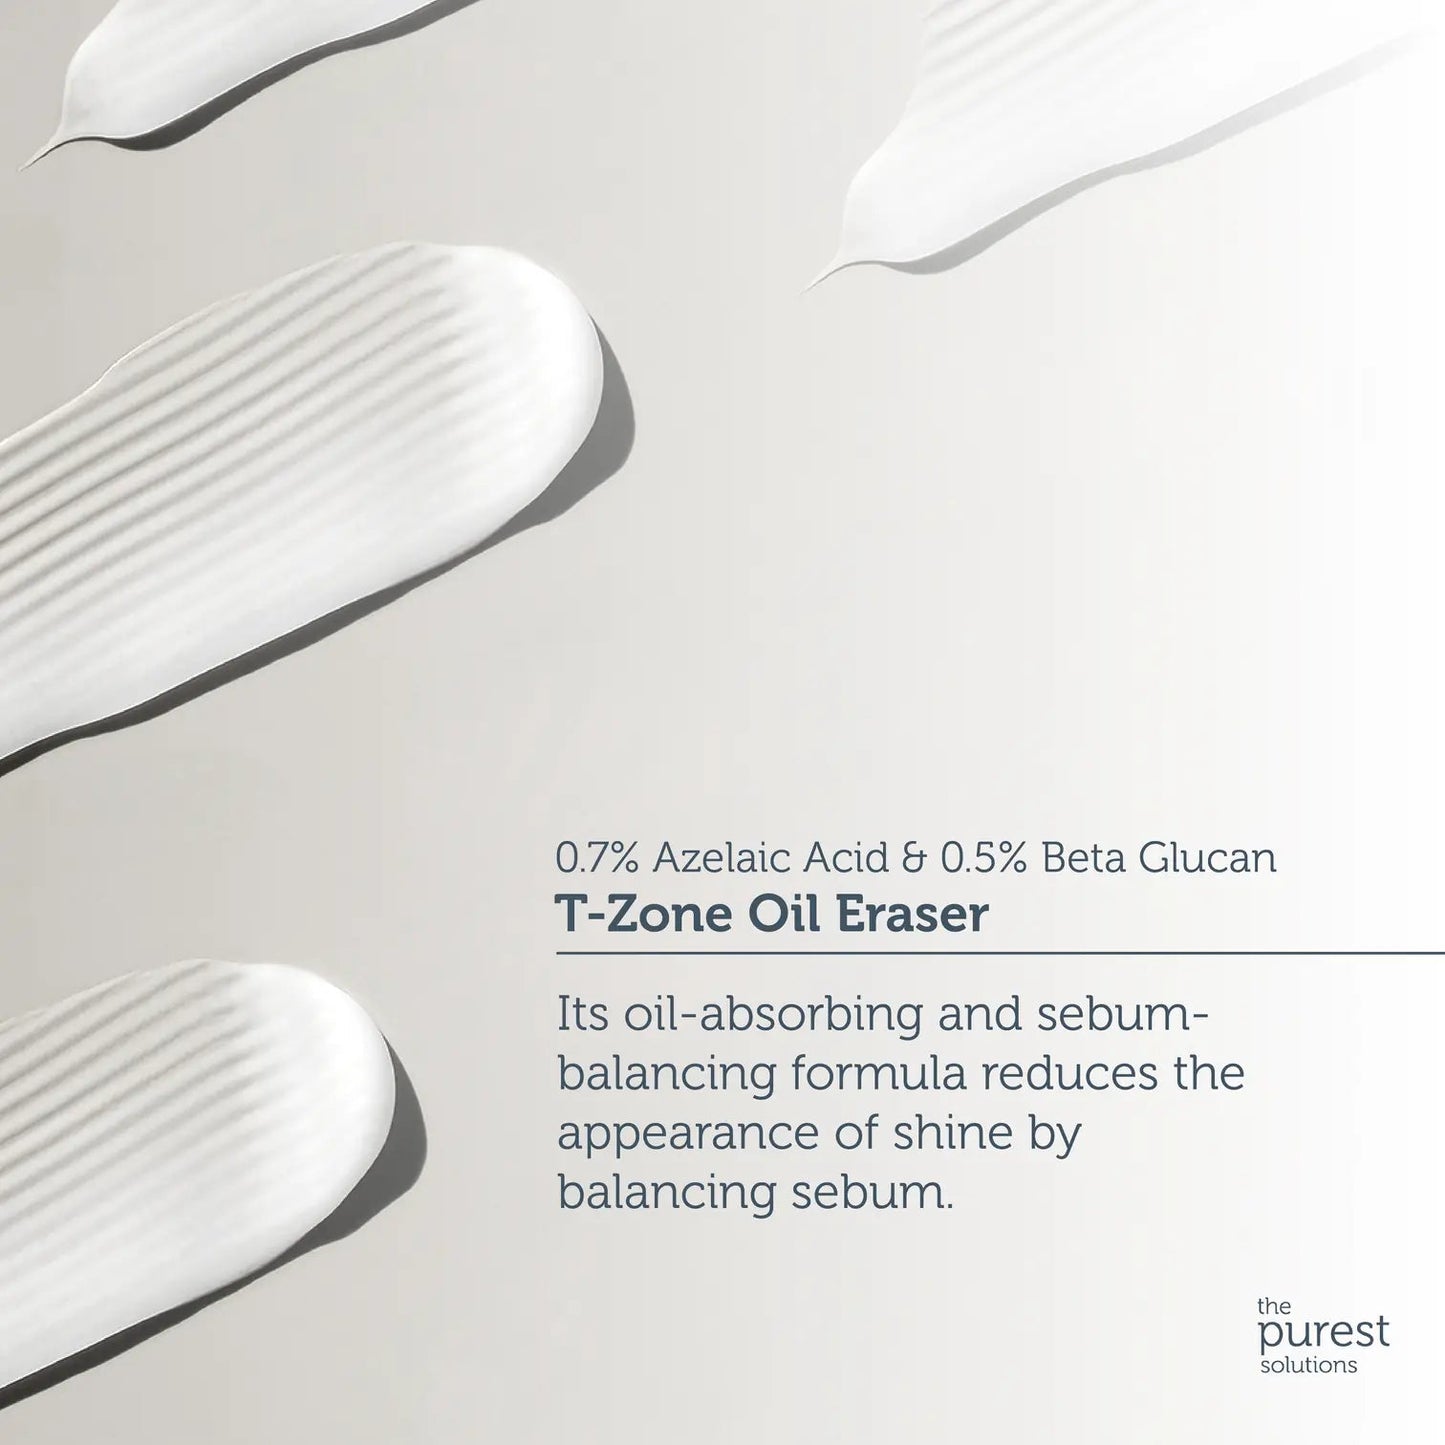 The purest solutions T-Zone Oil Eraser Minoustore